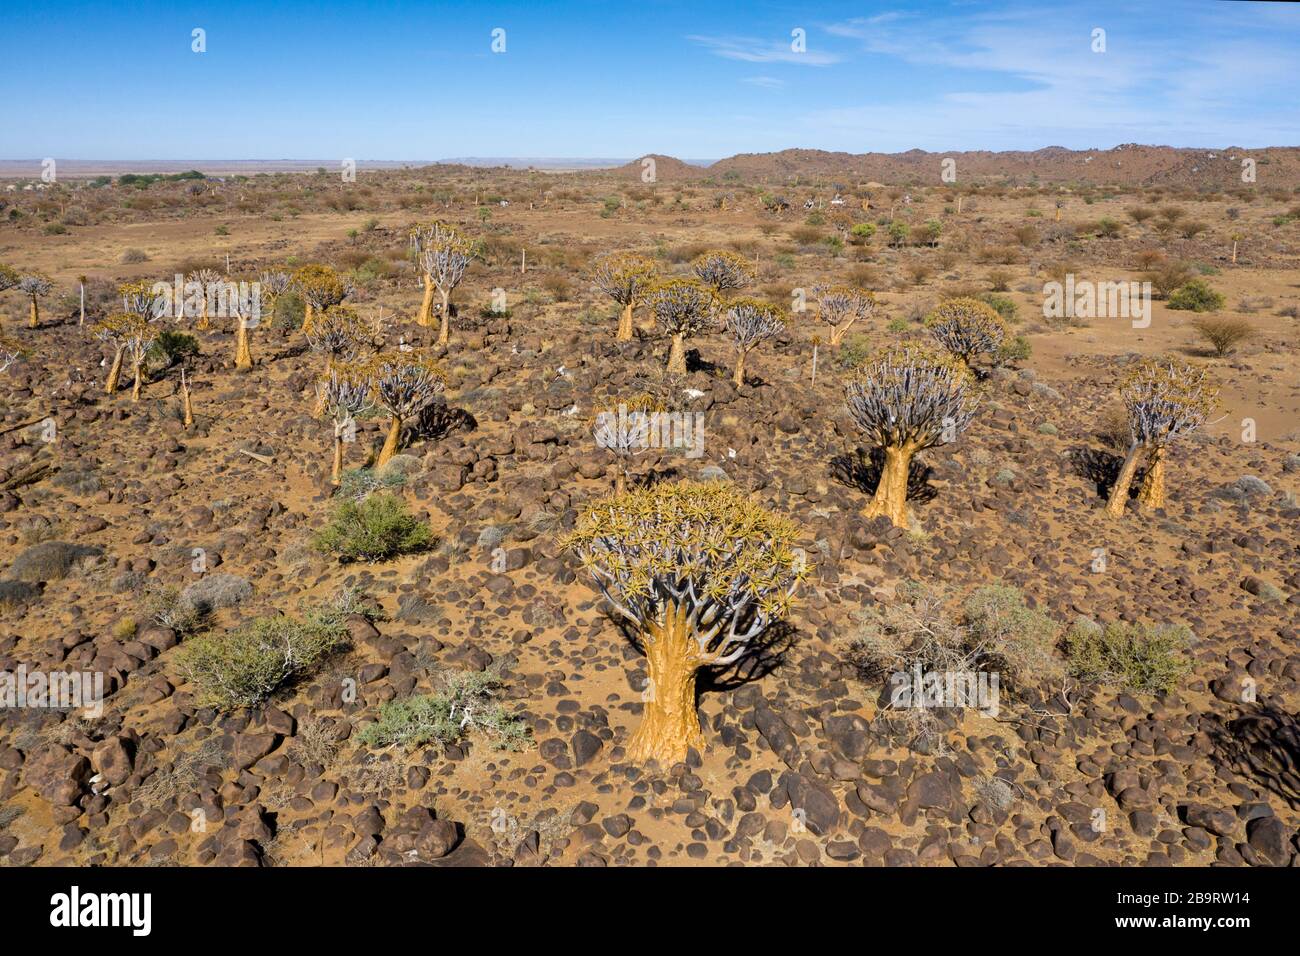 Impressioni di Quivertree Forest, Aloidendron dicotomum, Keetmanshoop, Namibia Foto Stock